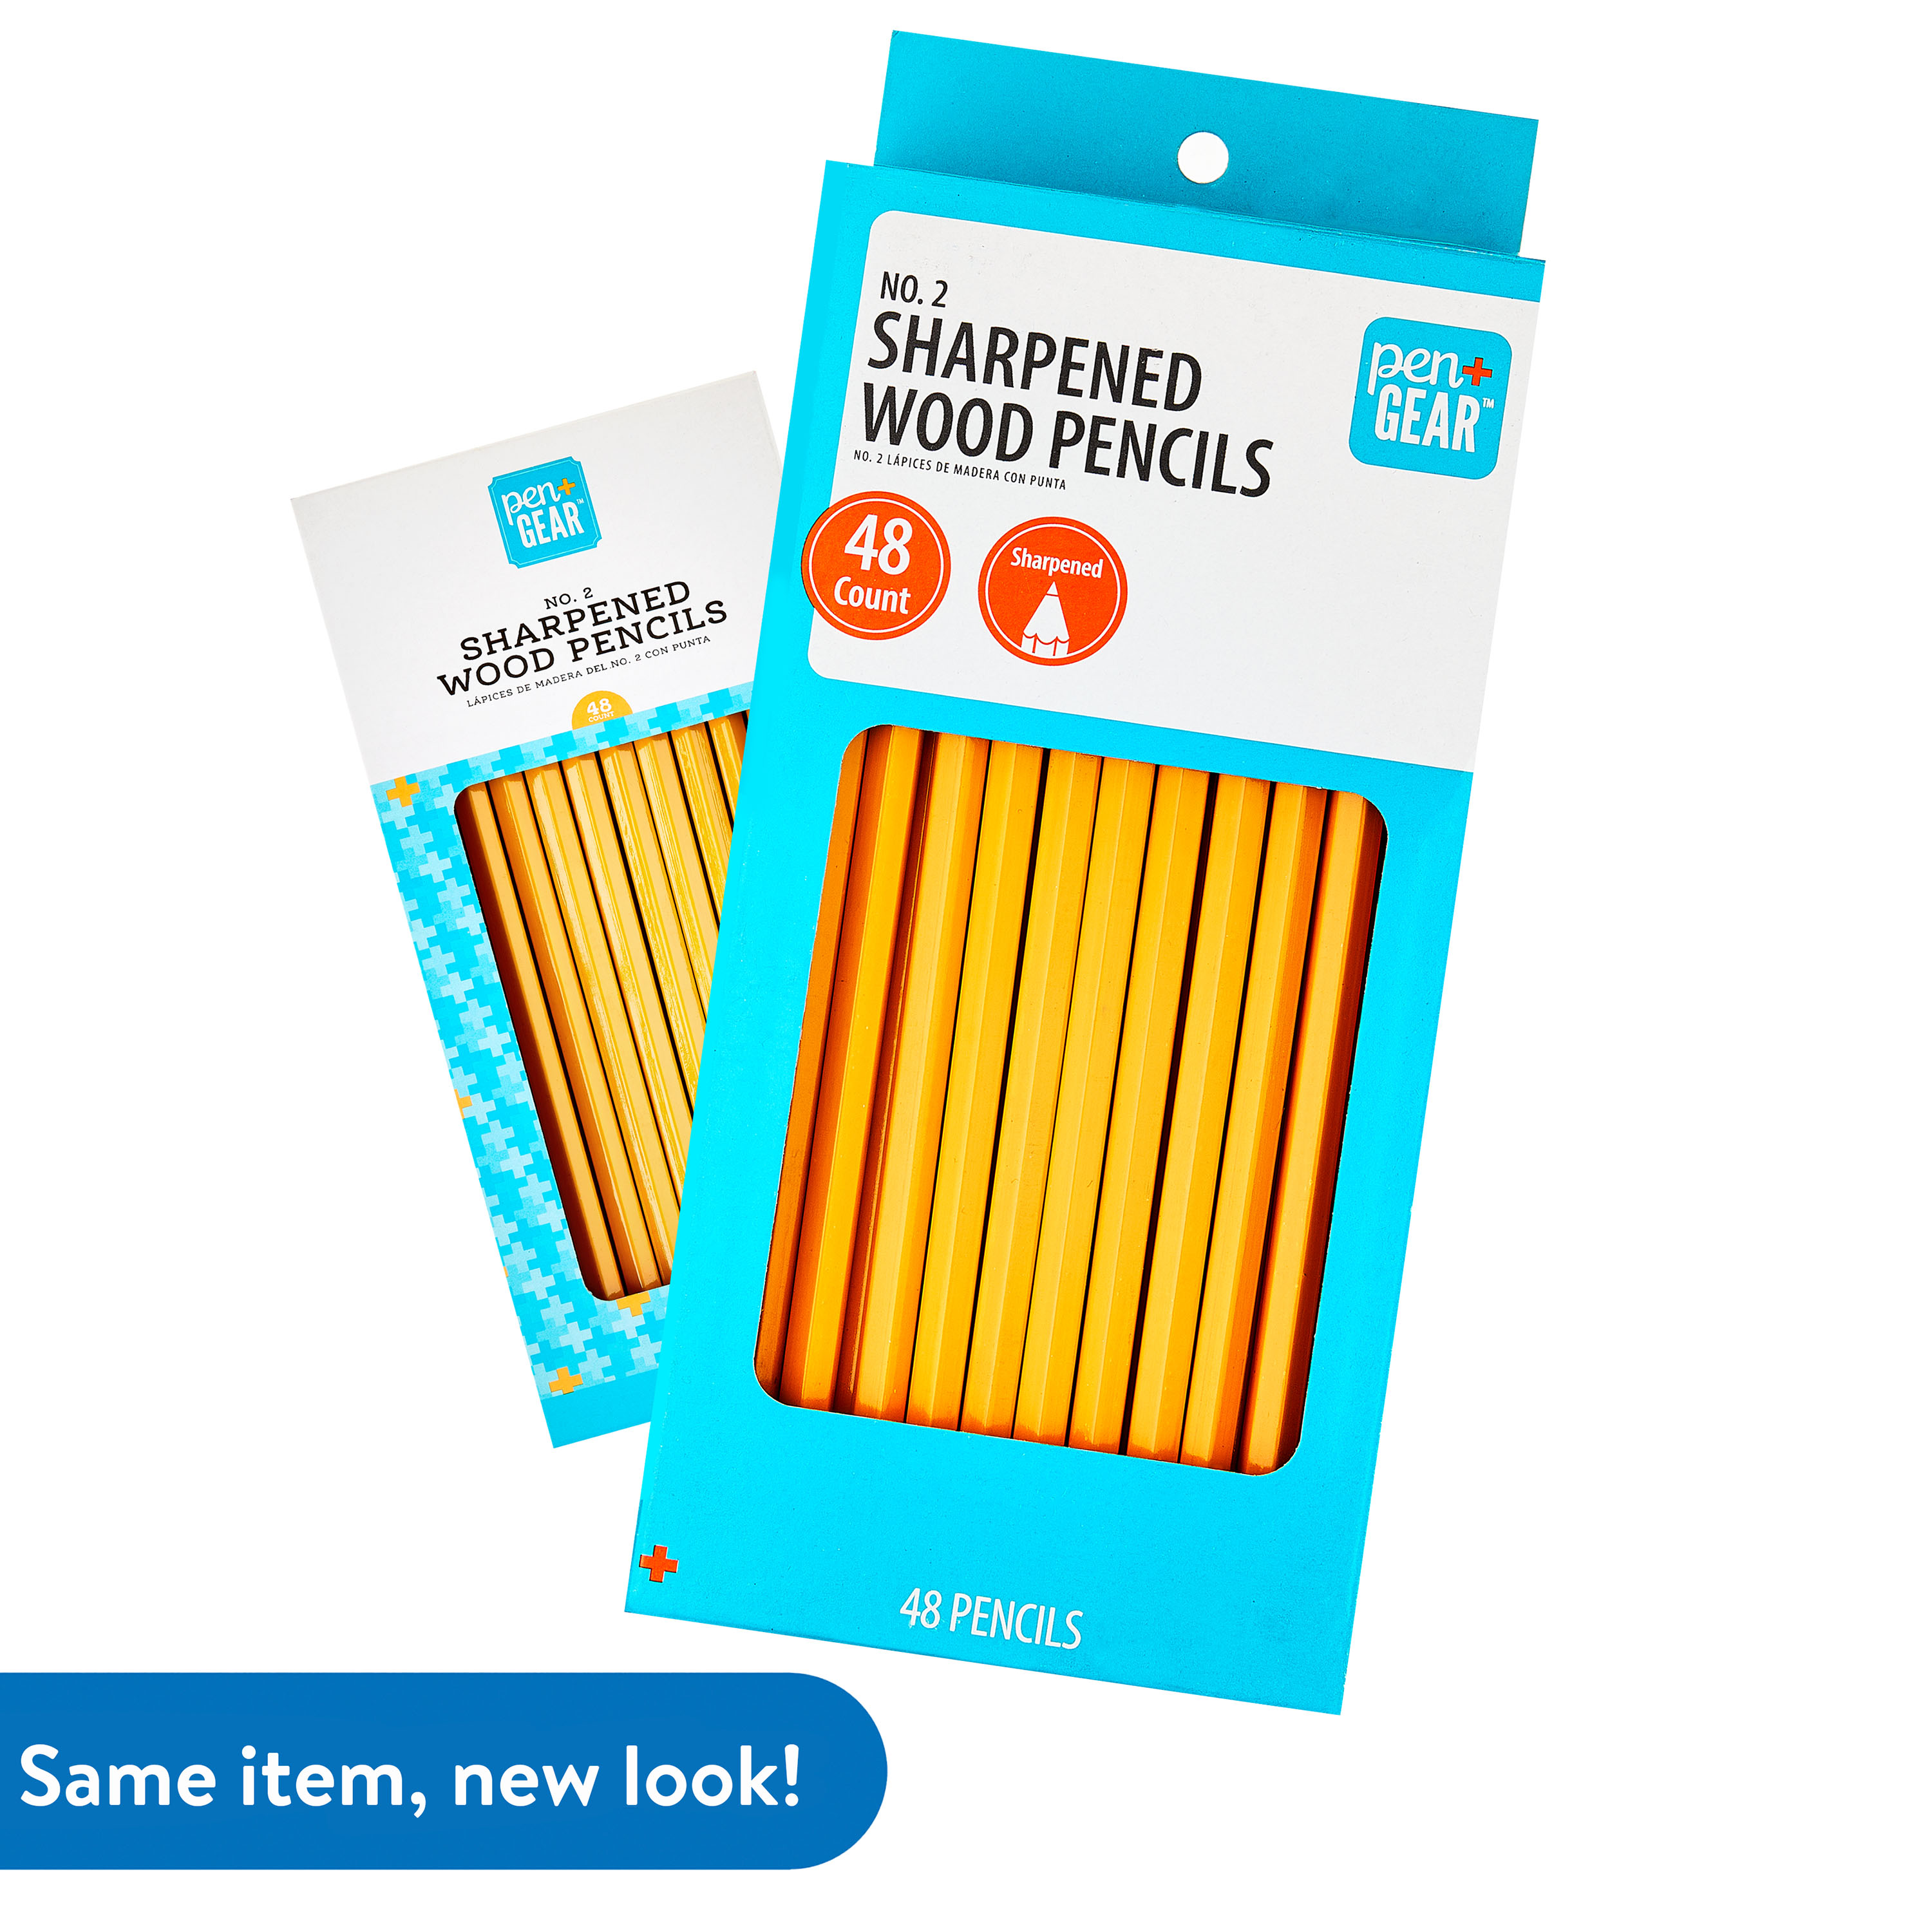 Pen+Gear No. 2 Wood Pencils, Sharpened, 48 Count - image 4 of 10